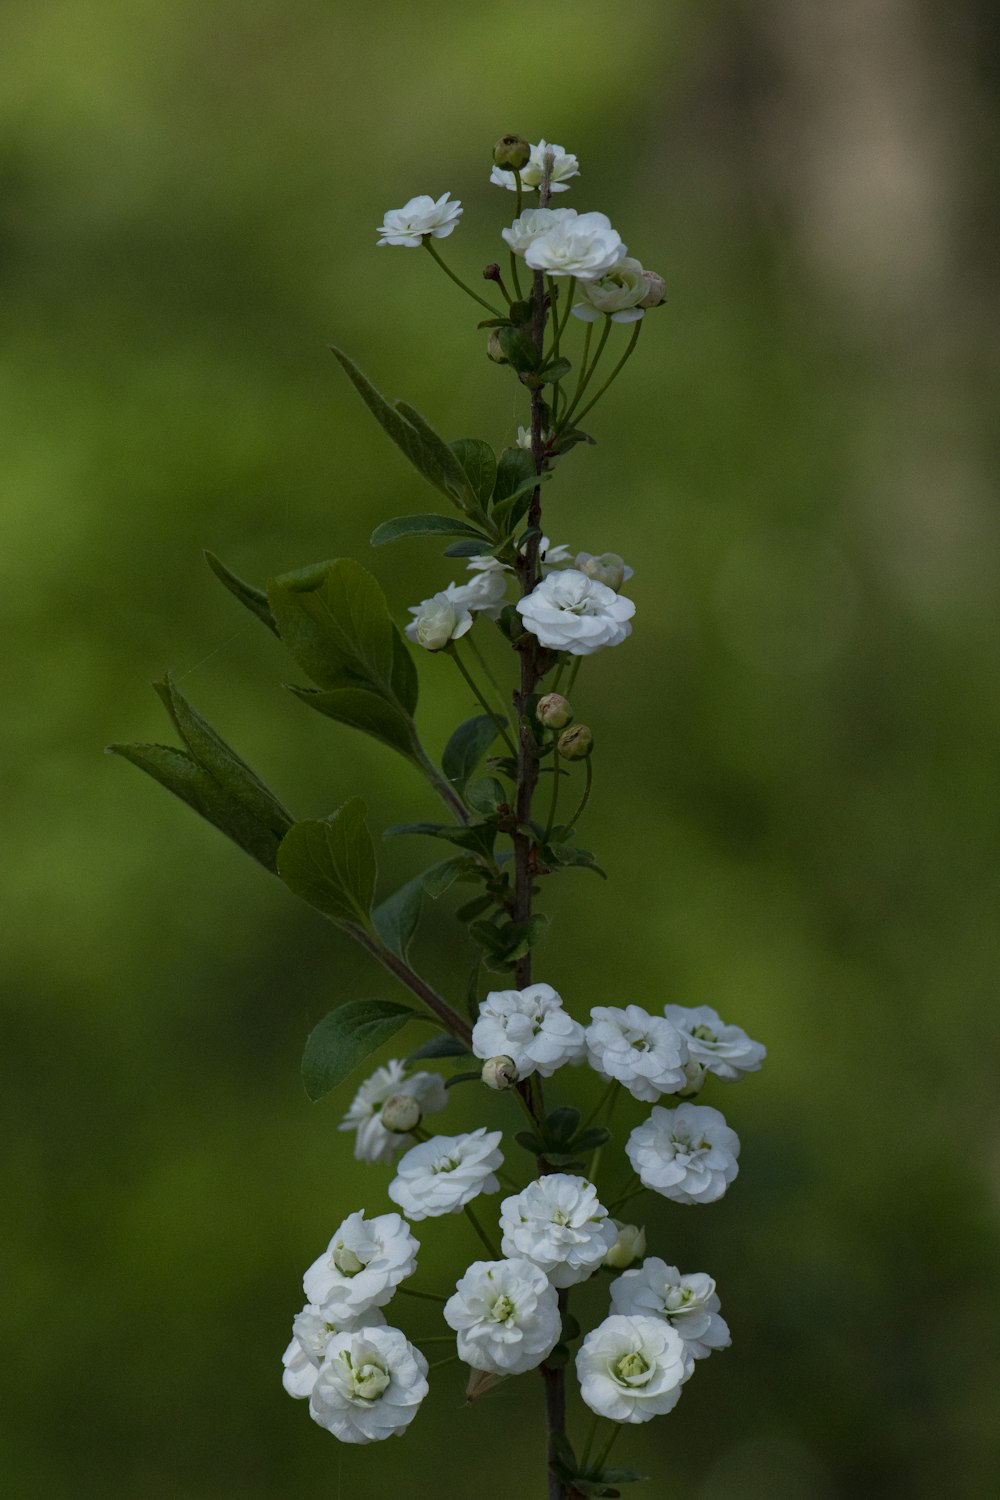 a close up of a white flower on a stem